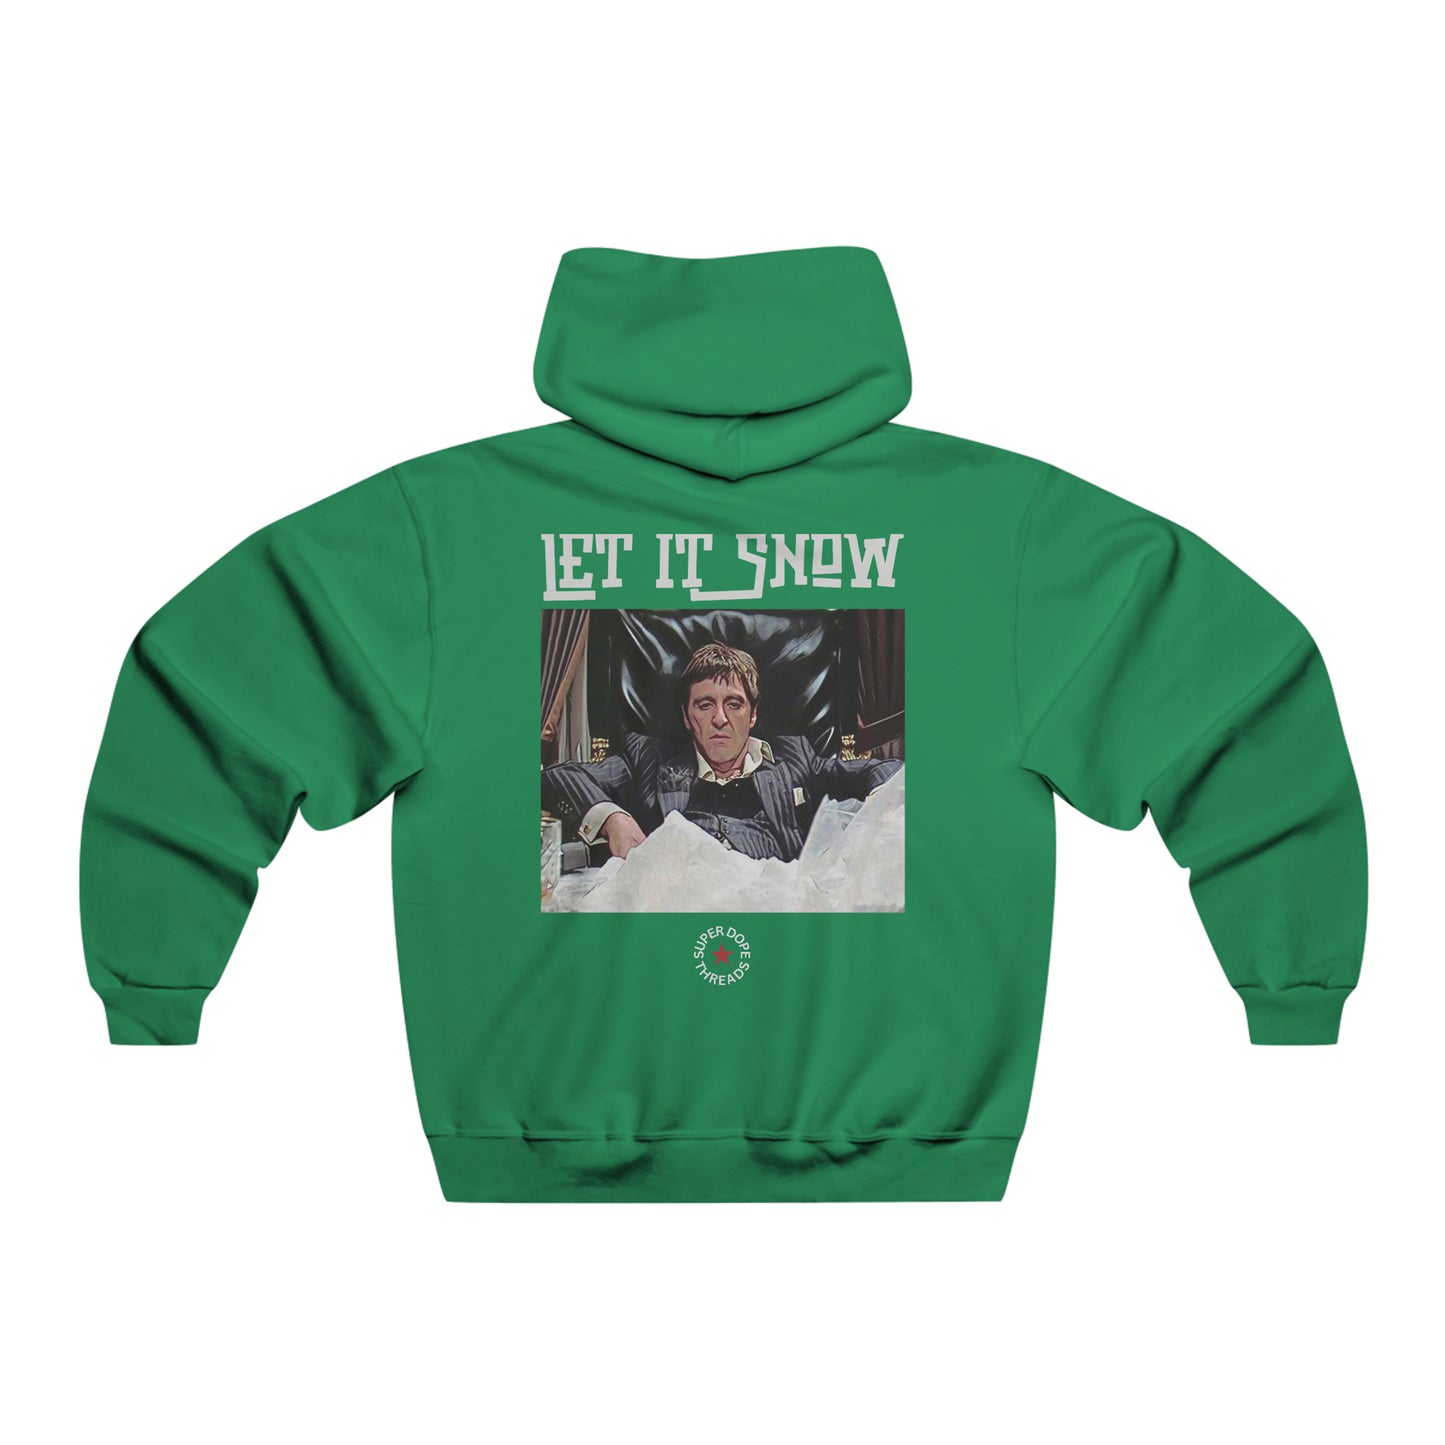 Super Dope Threads - The Chad (Let it snow) Hoodie